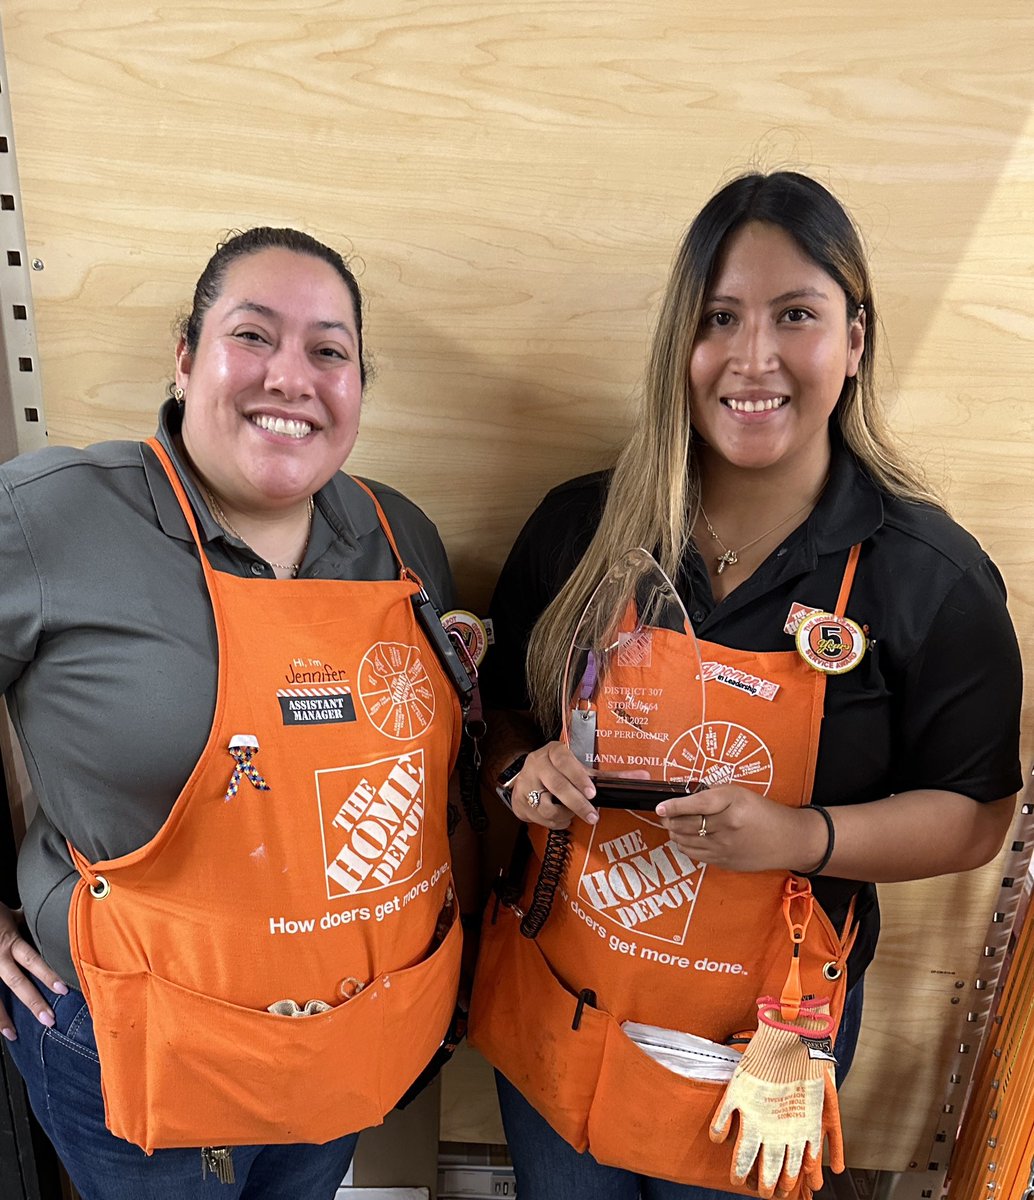 Recognizing @Hanna08258794 for her outstanding achievements “Top Performer 2H” HD Store 6564. Awesome Job!! 🎉 Keep up the great work. @elizondo_iii @65fbea @13lucylu_HD @JeffSmi05587241 @HRMThomasTHD @smitty04 @AlexSal2911 @Chrissaw3